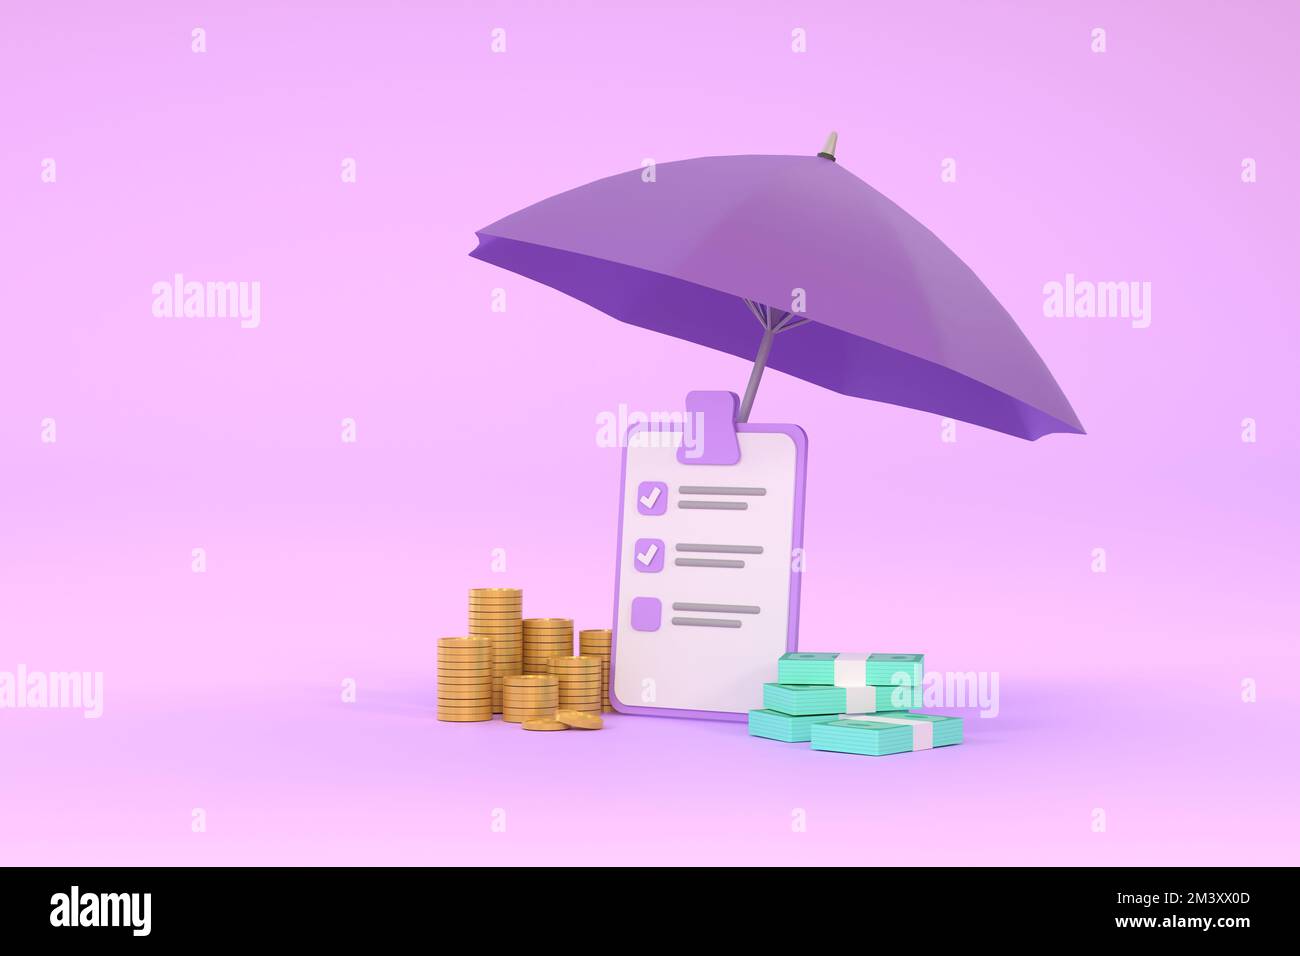 3D. Piles of golden coins and banknotes under purple umbrella. Stock Photo